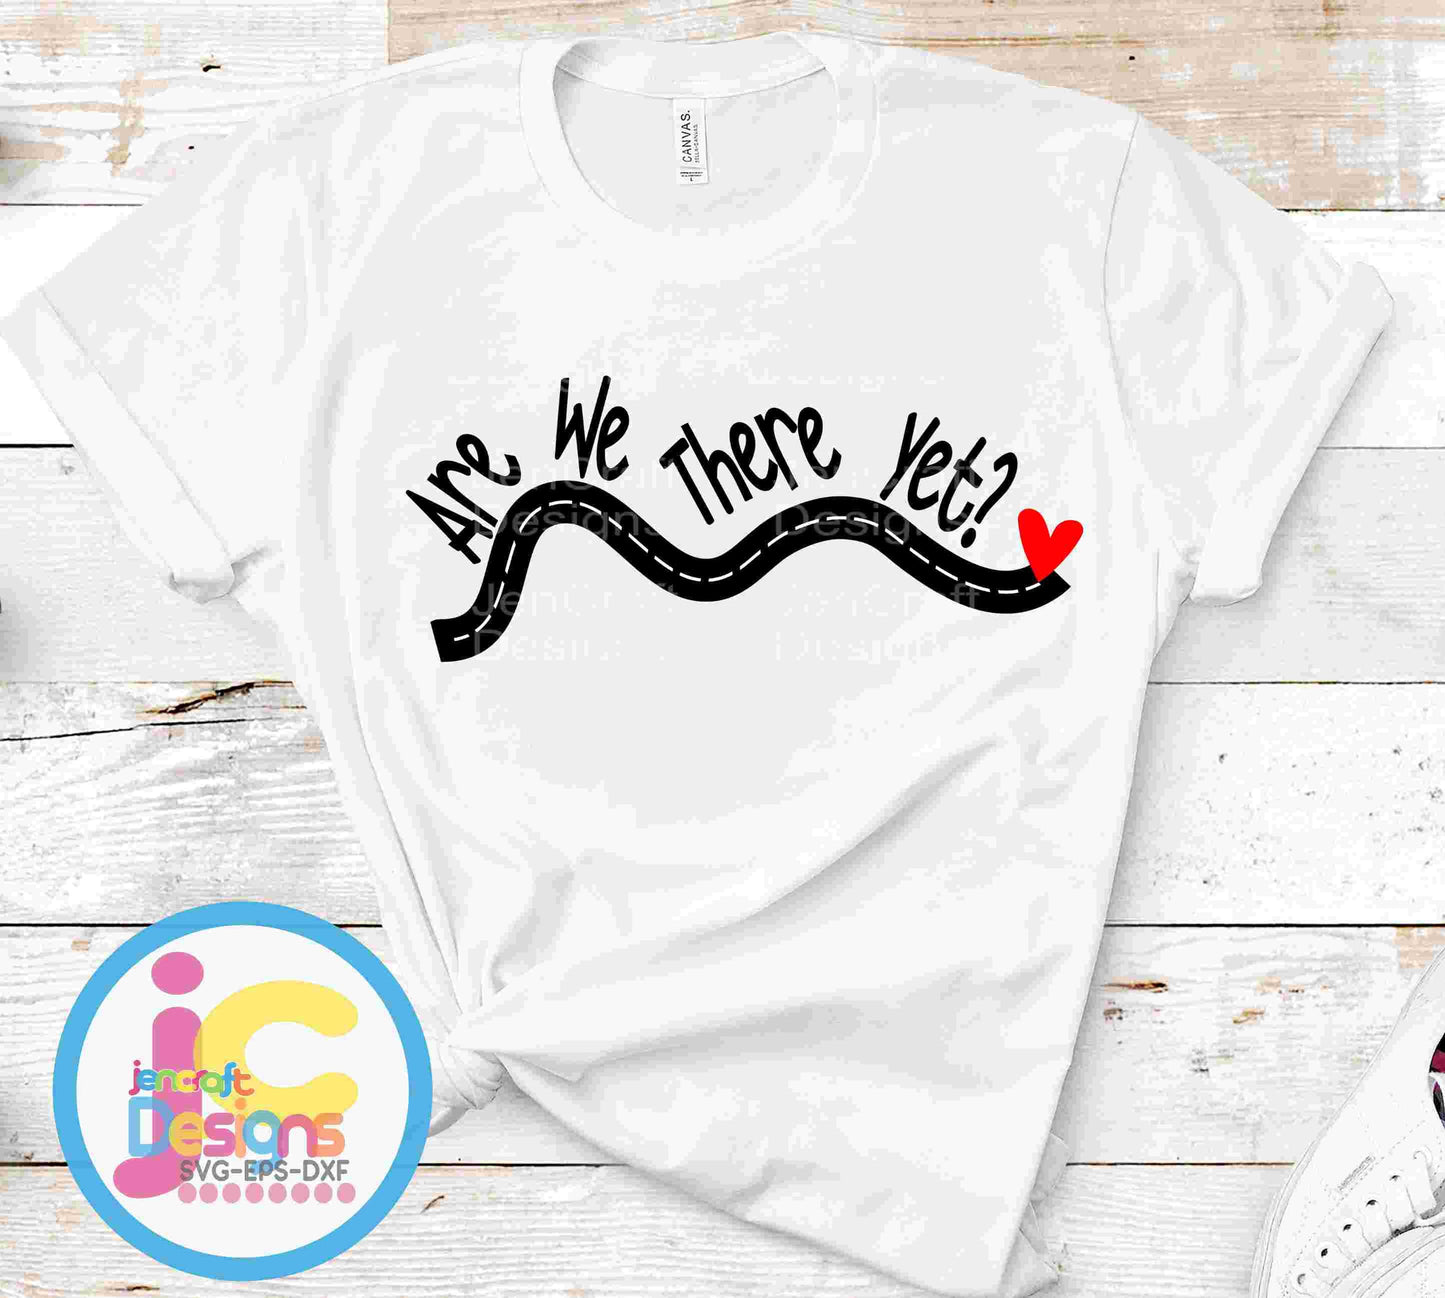 Are we there yet Trip Svg Eps Dxf Png Cut File - JenCraft Designs